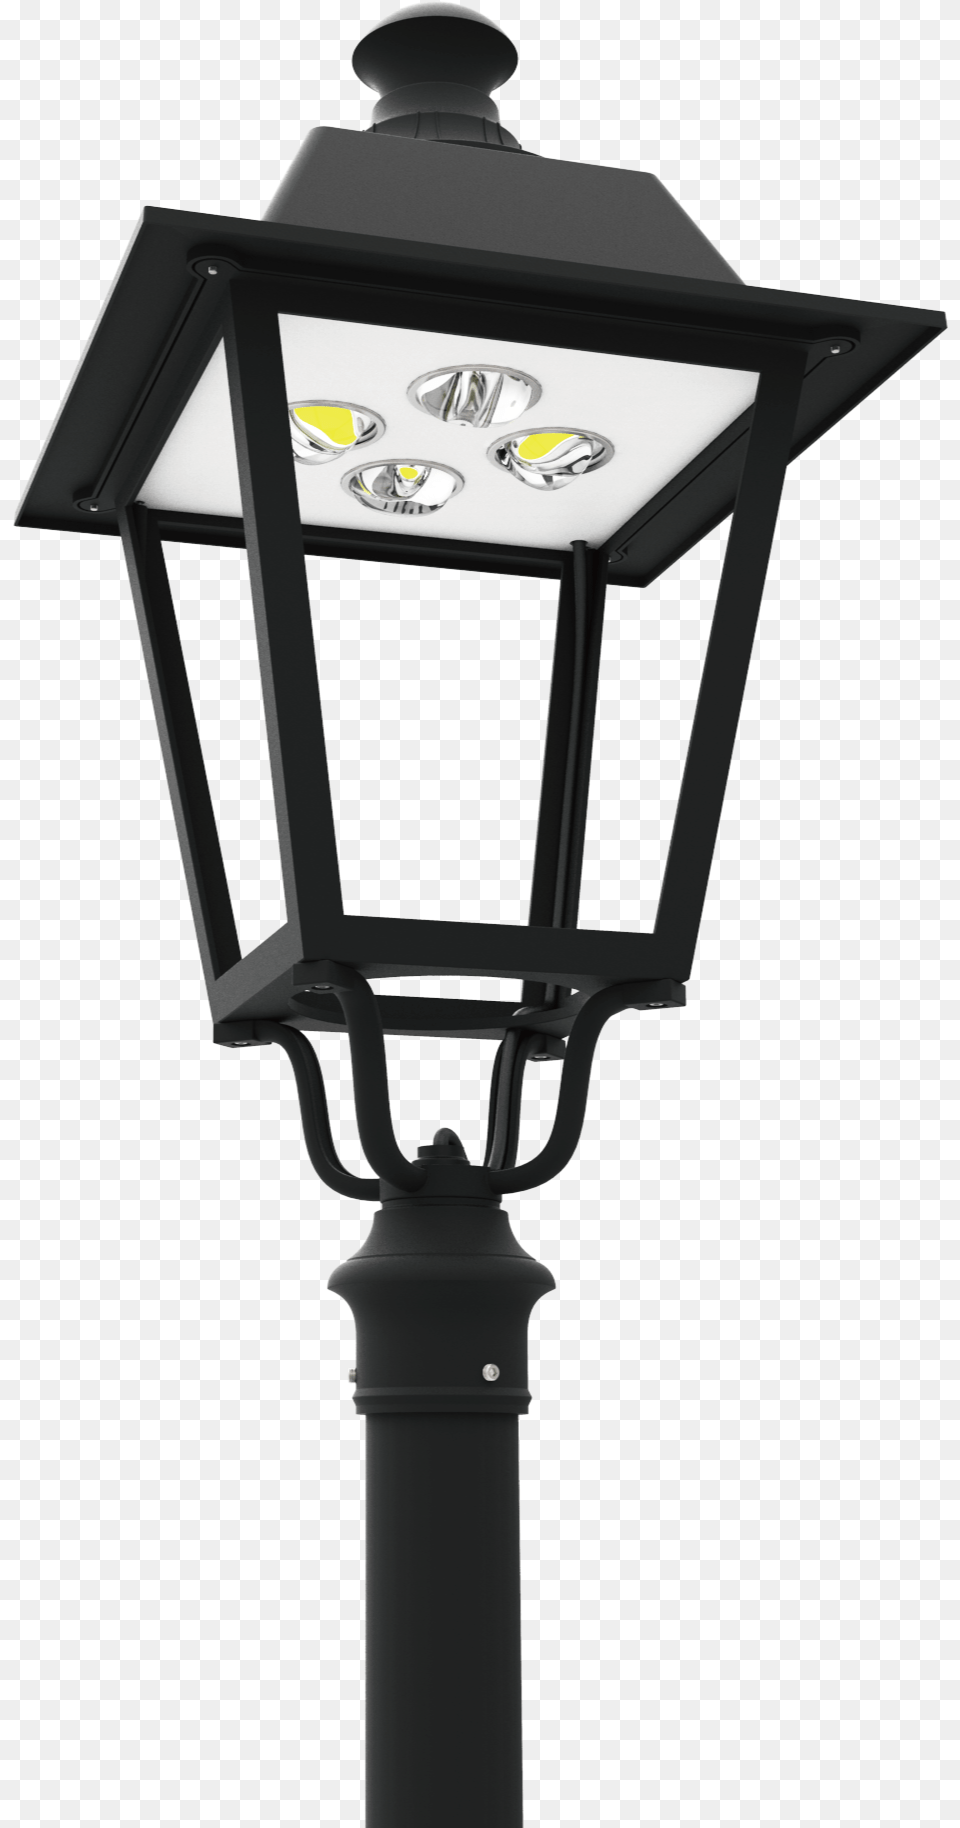 Lamp Post Clipart Park Light Full Size Led Post Top Light Fixtures, Lampshade, Lamp Post Png